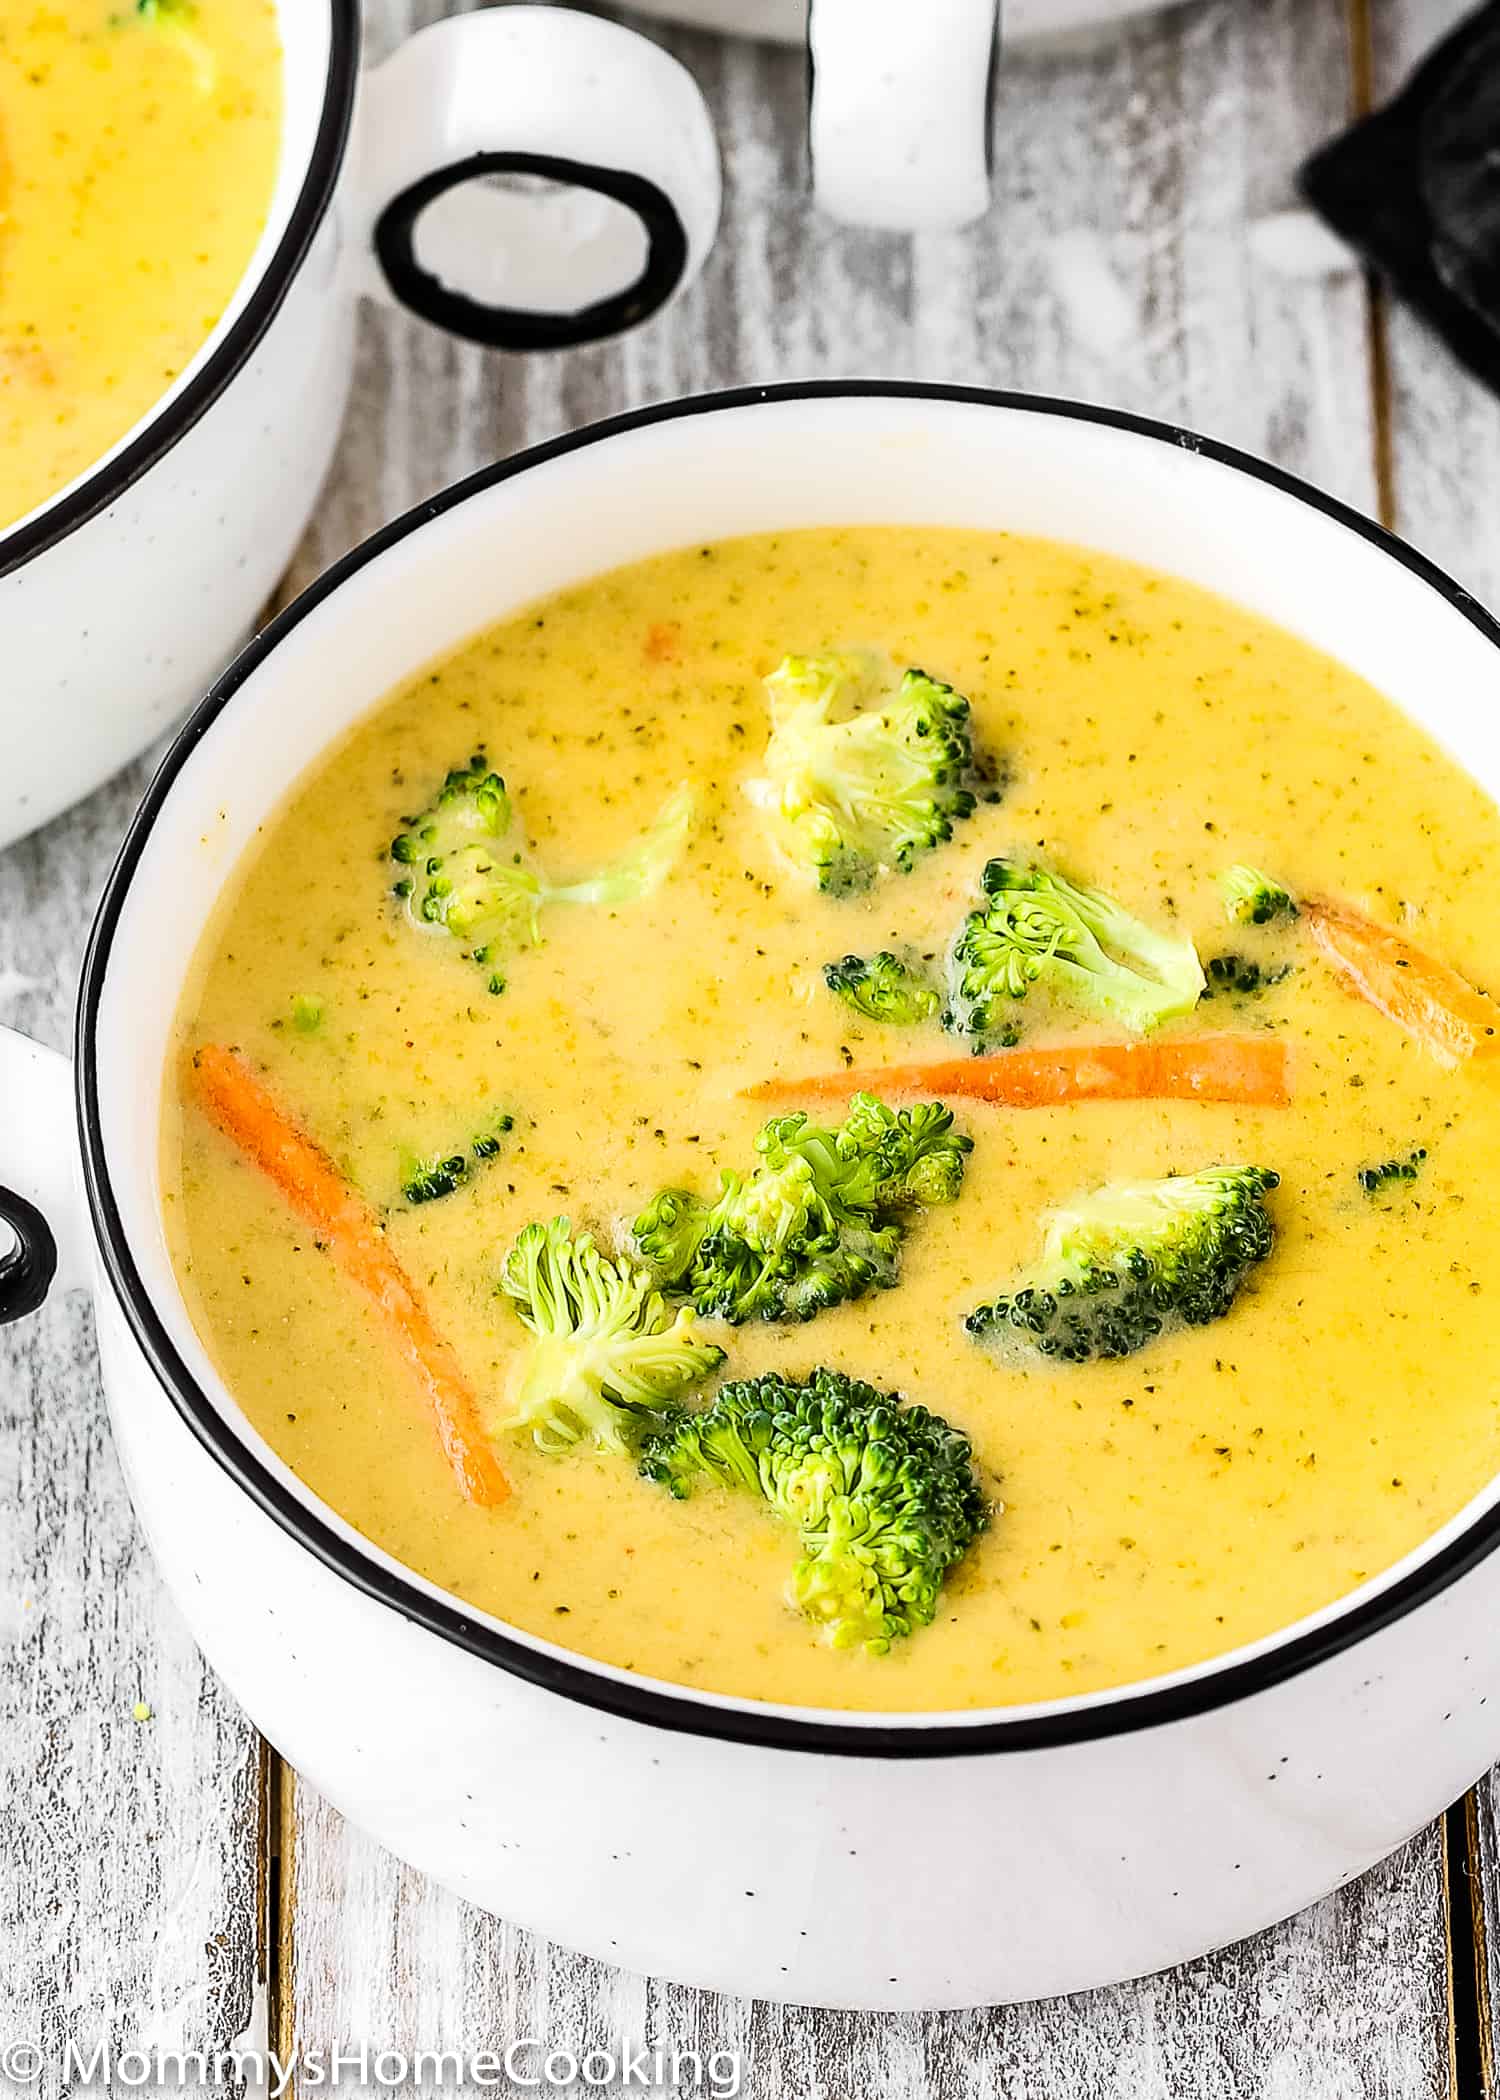 This Quick and Easy Instant Pot Broccoli Cheddar Cheese Soup Recipe is pure comfort food at its best! It’s creamy, rich, and oh so cheesy. The best part is that this soup is ready in about 20 minutes from start to finish! https://mommyshomecooking.com